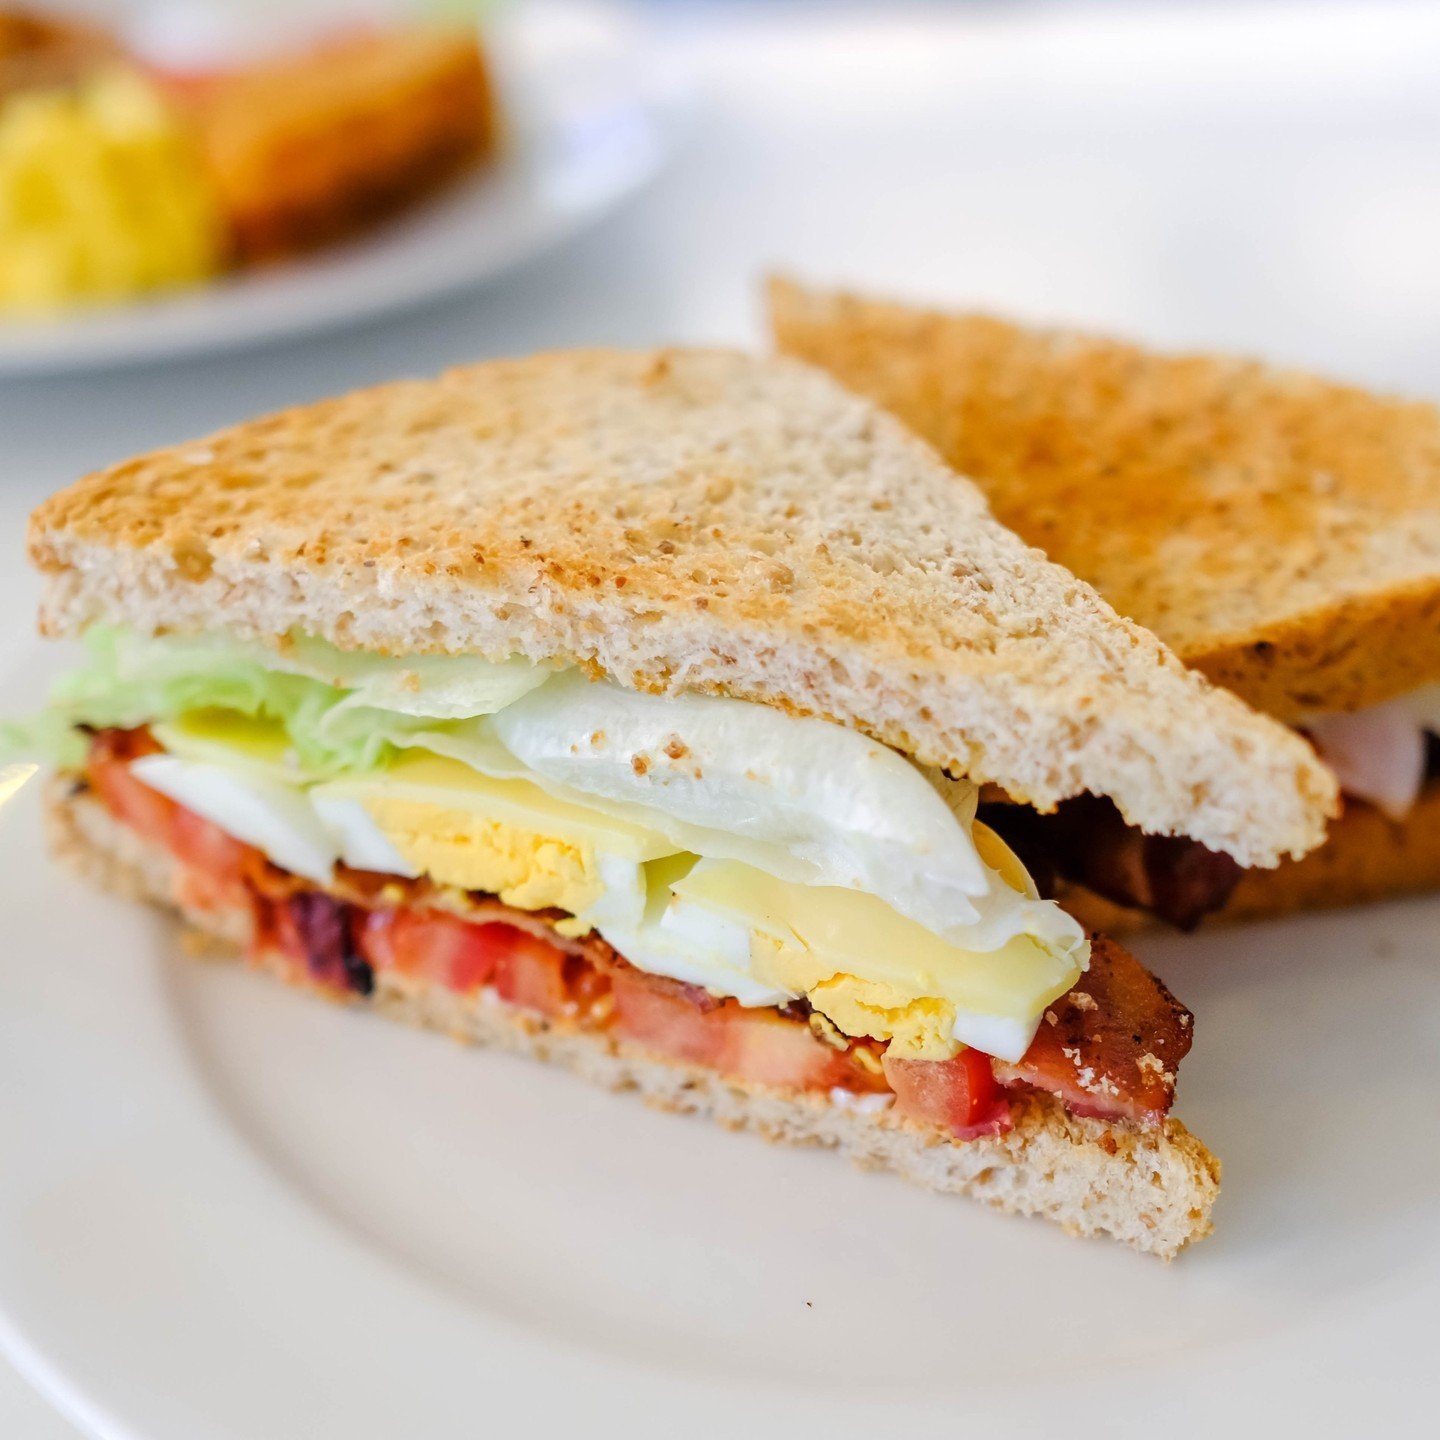 Whip up this delectable @egglandsbest Egg Salad Sandwich in a flash! Smoky, crunchy, and utterly delicious - a nutrient packed lunch ready in under ten minutes! 🥑🍳🥓

Ingredients:
4 Eggland's Best Hard-Cooked Peeled Eggs
1 Tbsp. Light Mayonnaise
1 